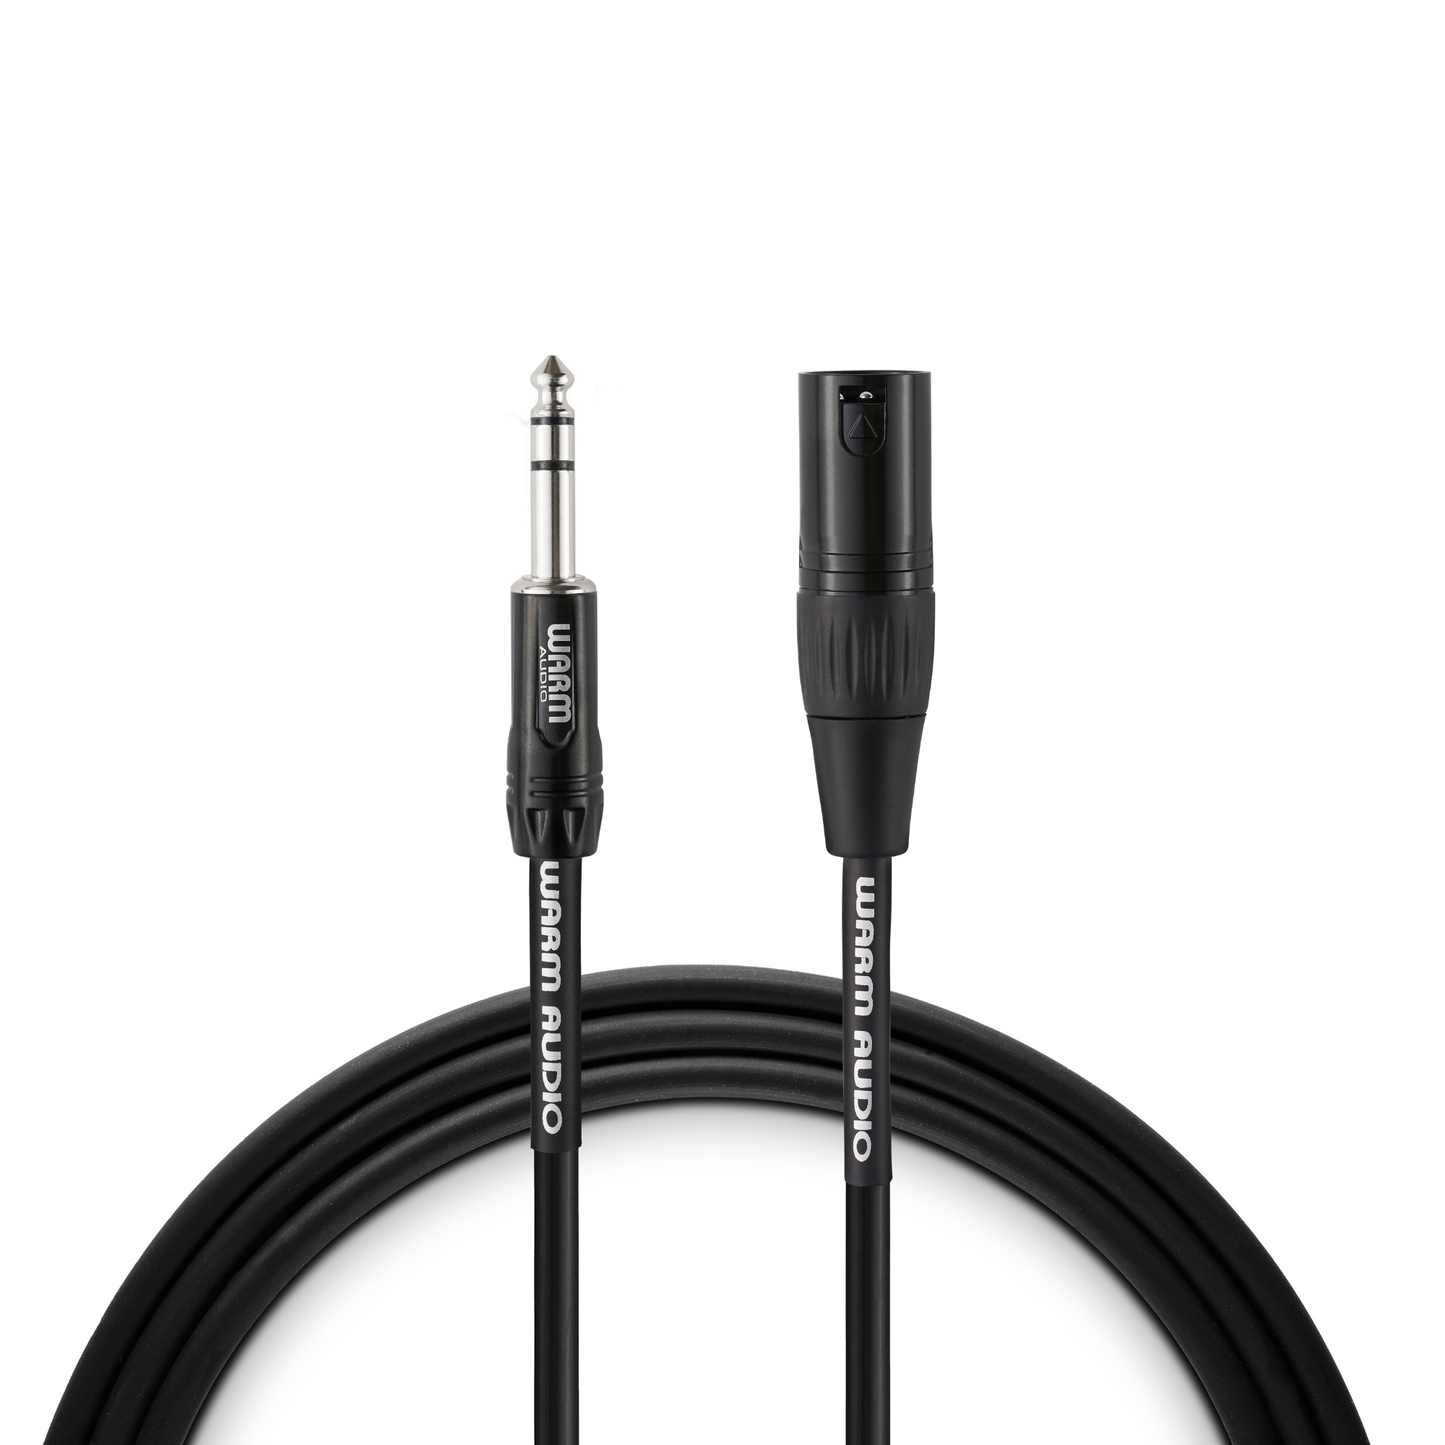 Warm Audio Pro Silver XLR Male to TRS Male Cable - 6-foot